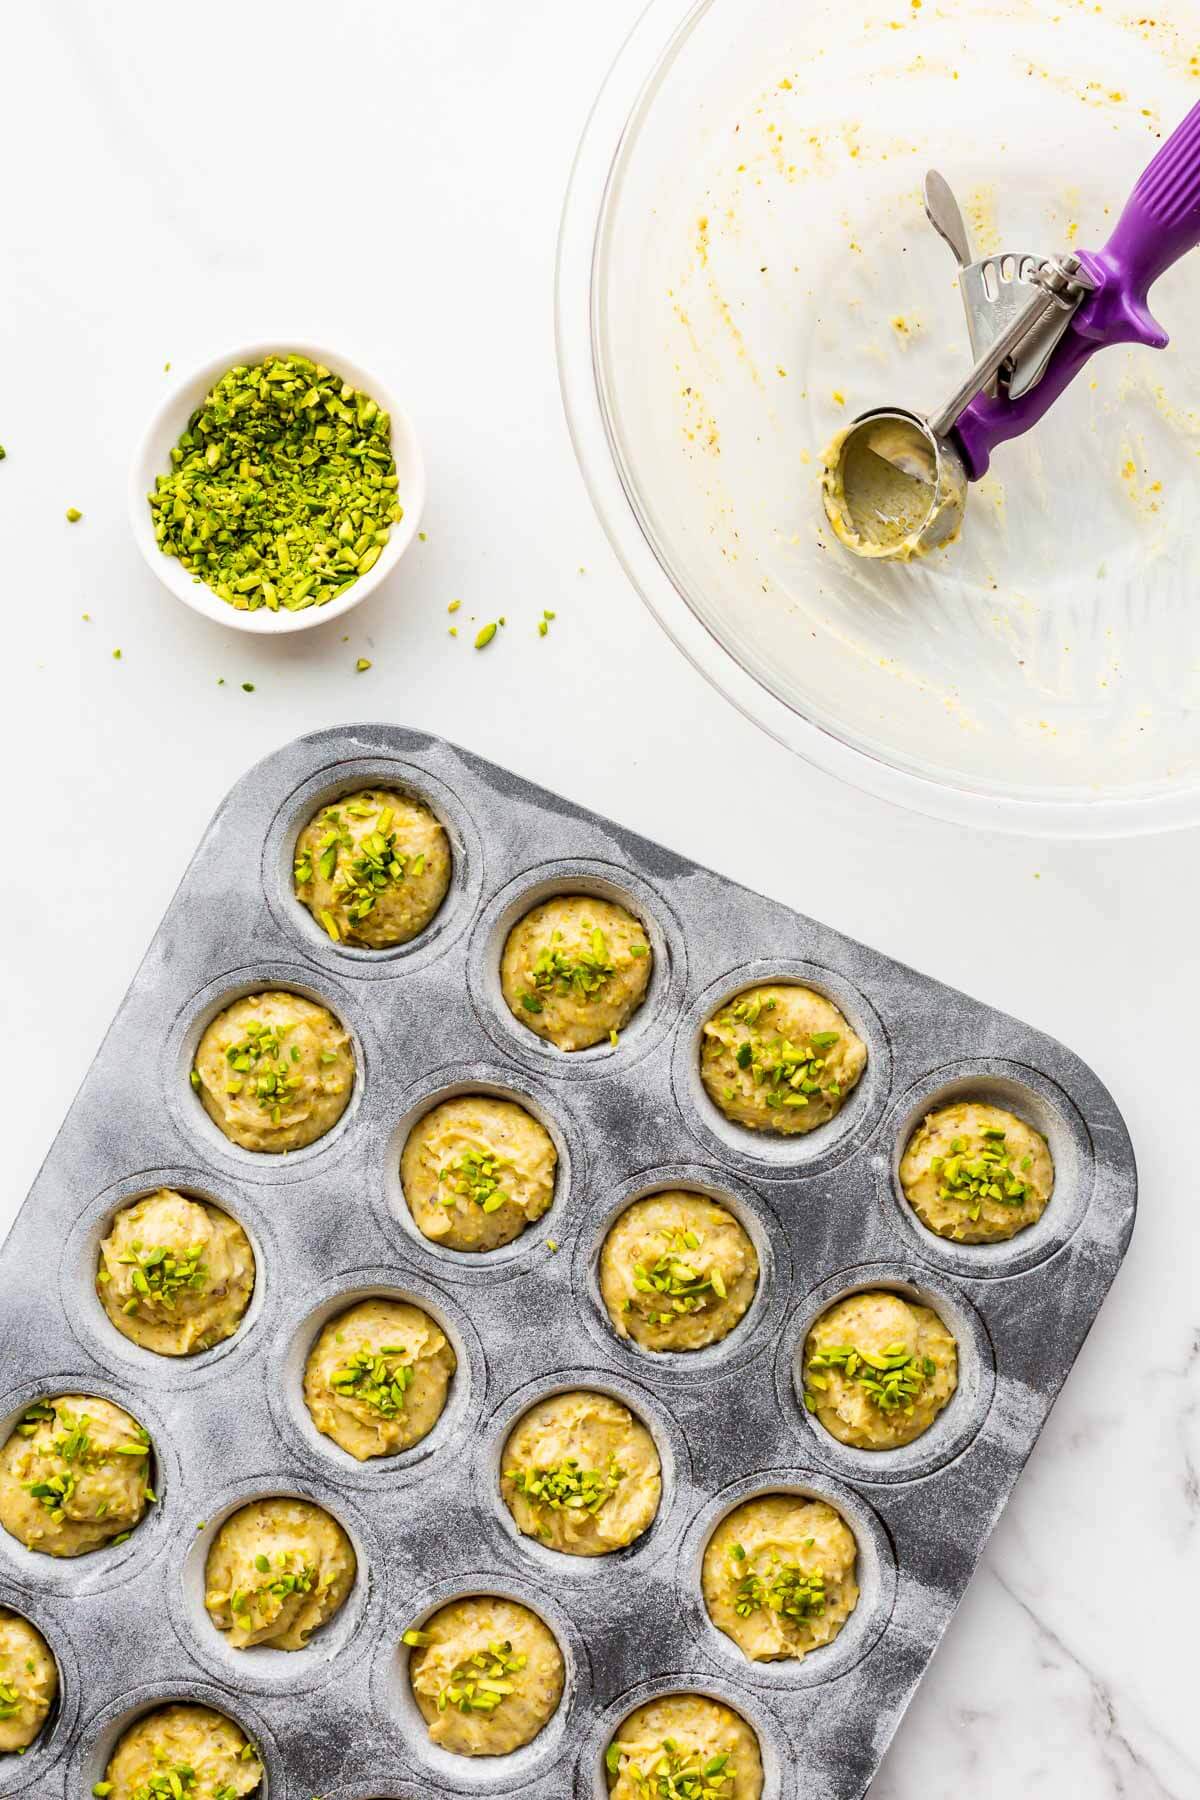 Scooping pistachio financier batter into a greased and floured mini muffin pan and sprinkling the tops with chopped pistachios before baking.